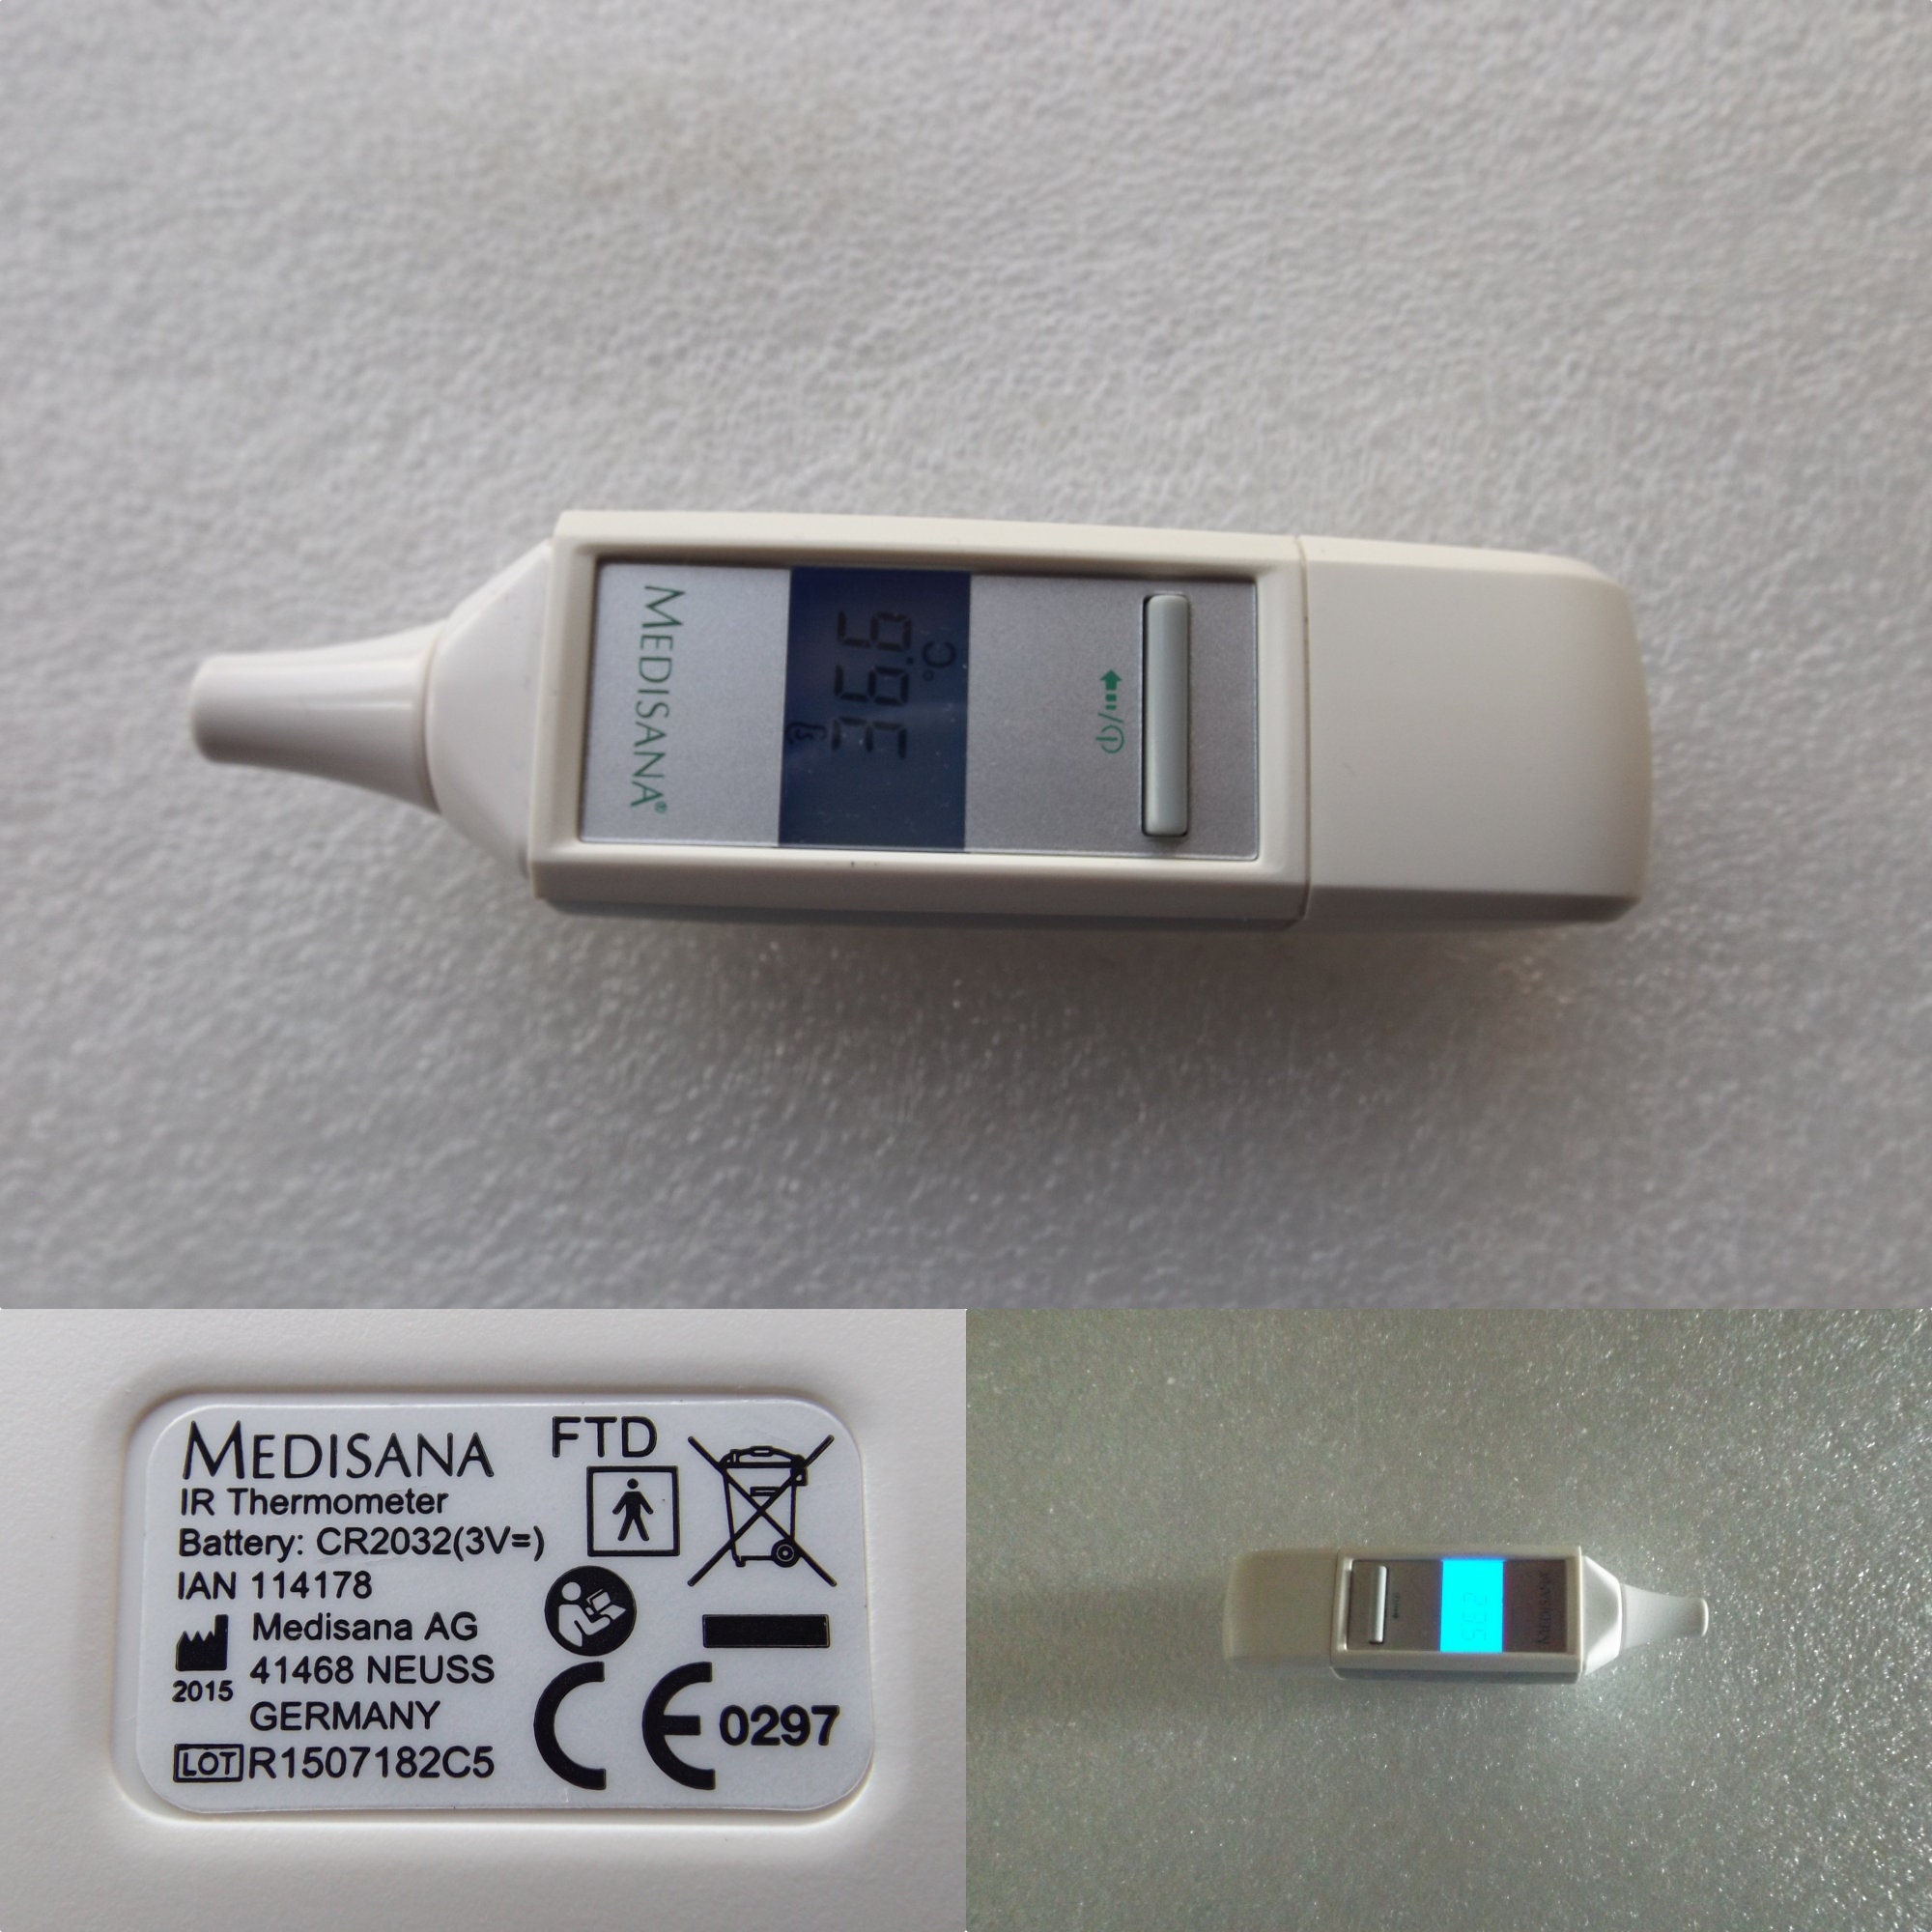 Etsy FREE FTD, SHIPPING 1 Thermometer White, Room Display, Ear, Temperature, Germany, - in Medisana 3 Forehead, Infrared Electronic